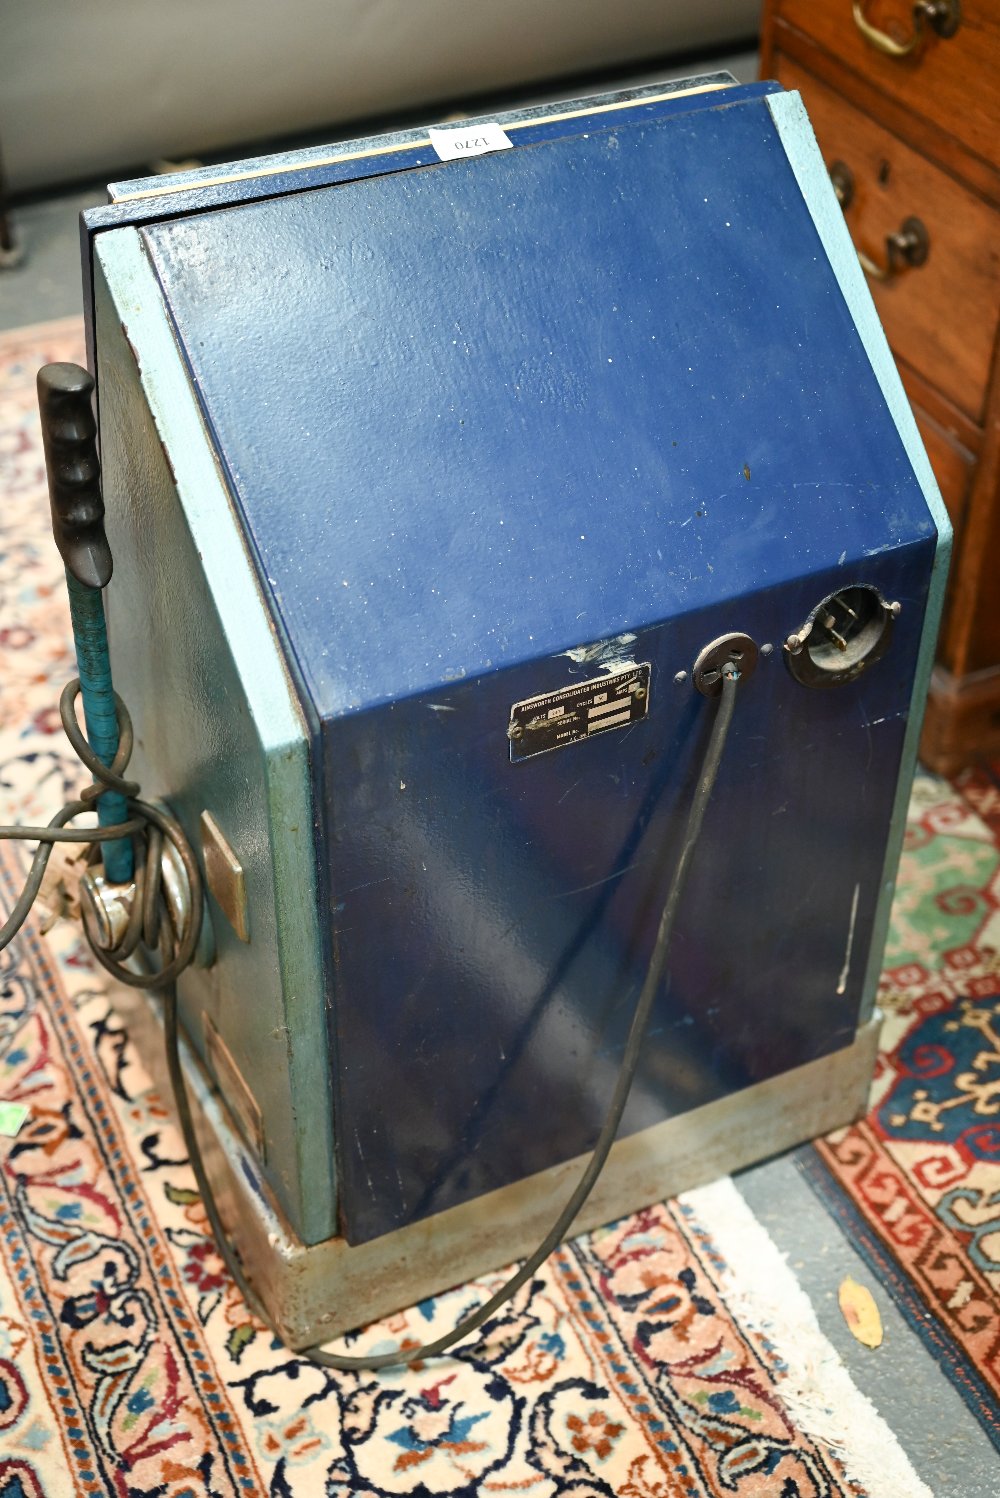 A vintage Aristocrat Olympic 'Carousel one-armed bandit' (fruit machine - Image 6 of 6